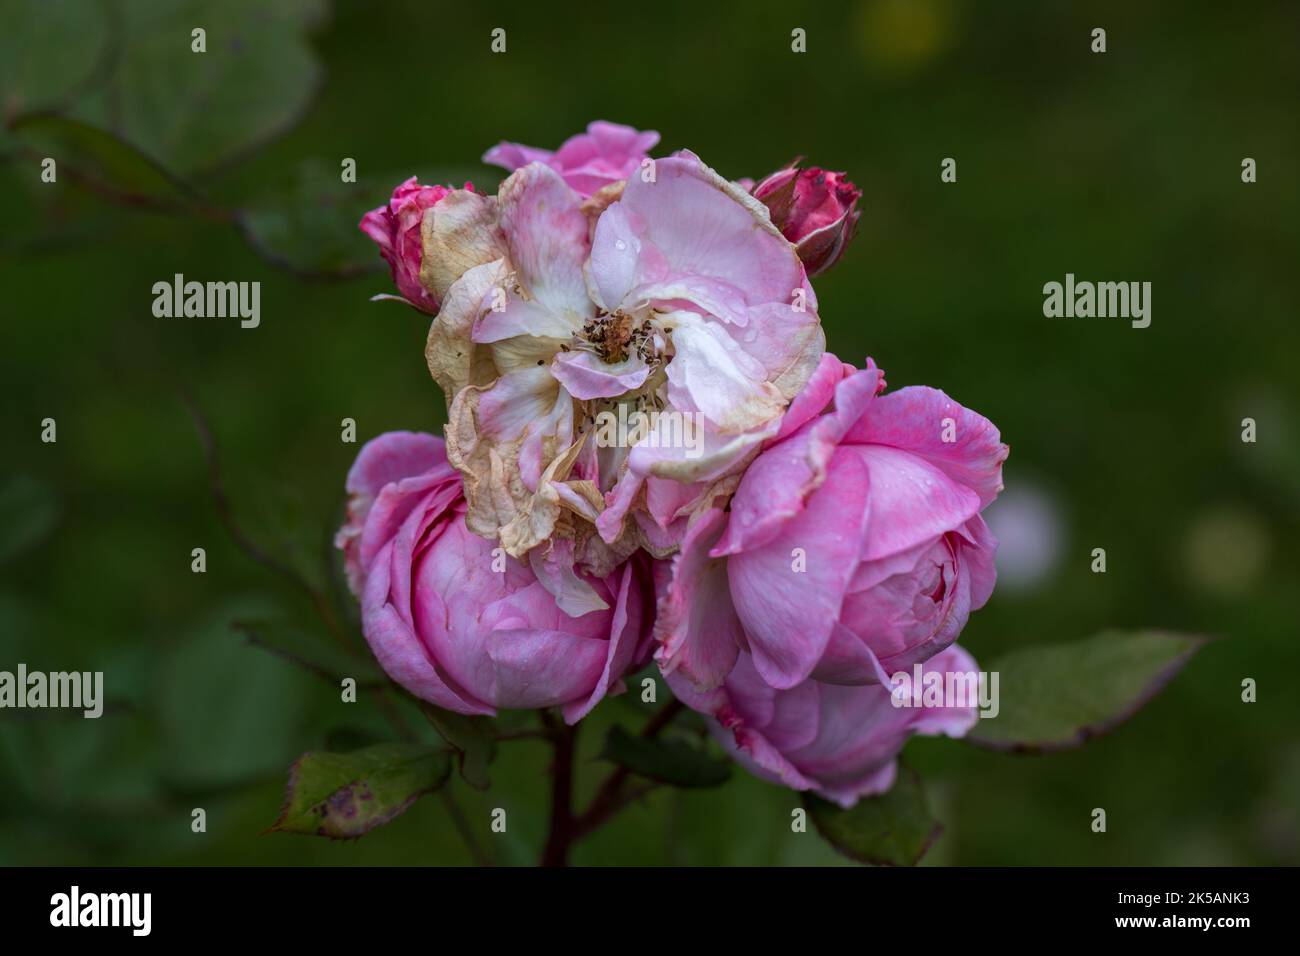 Graceful shoots of medium pink roses with buds and fading flowers against a dark green garden Stock Photo